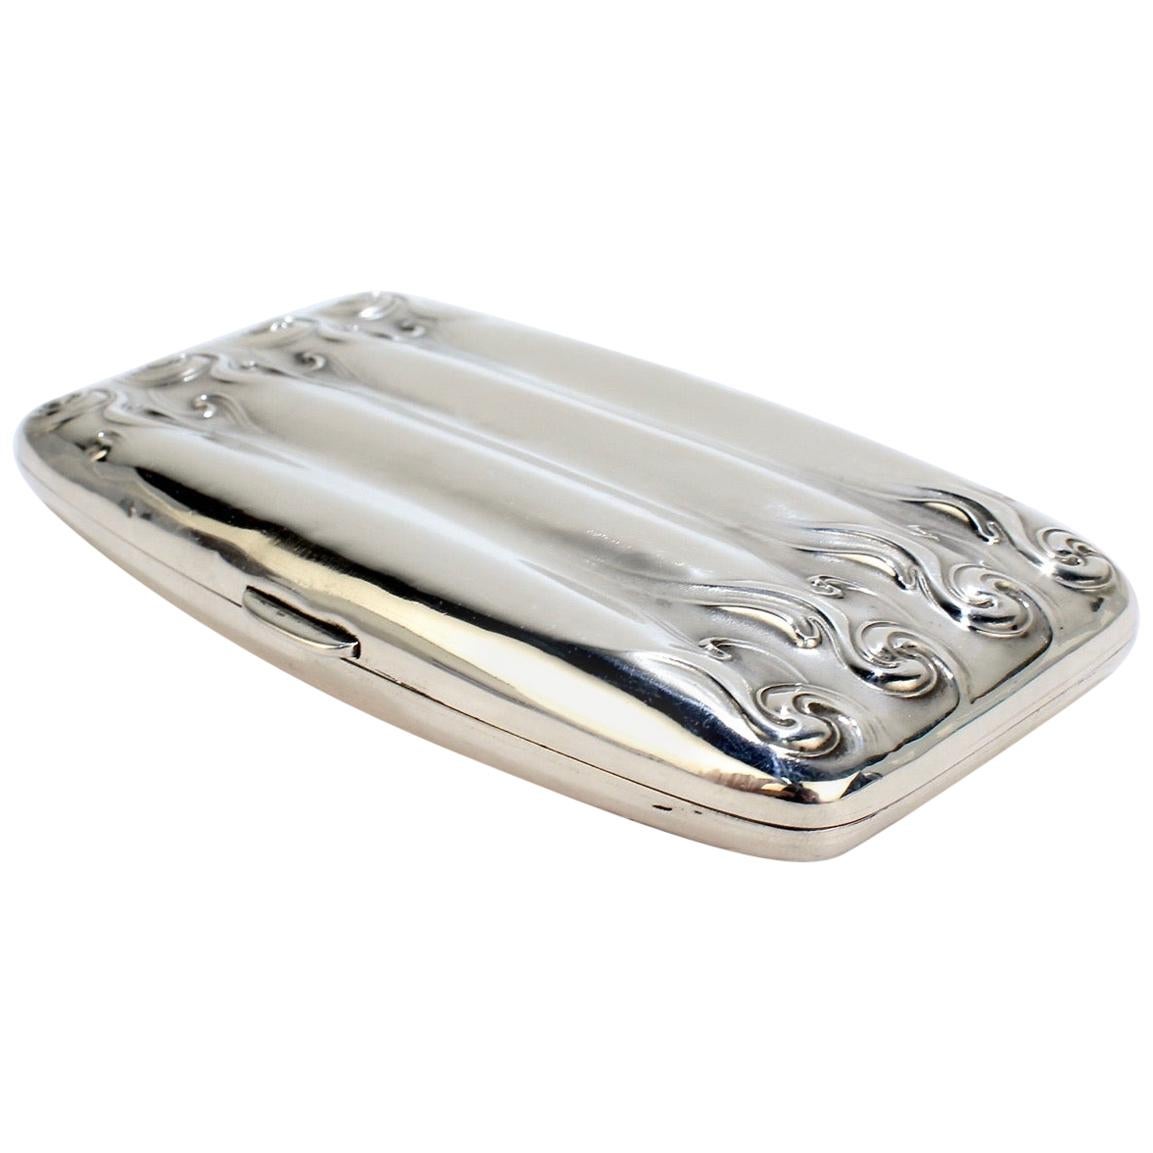 Antique Art Nouveau Sterling Silver Cigar Case by Unger Brothers For Sale